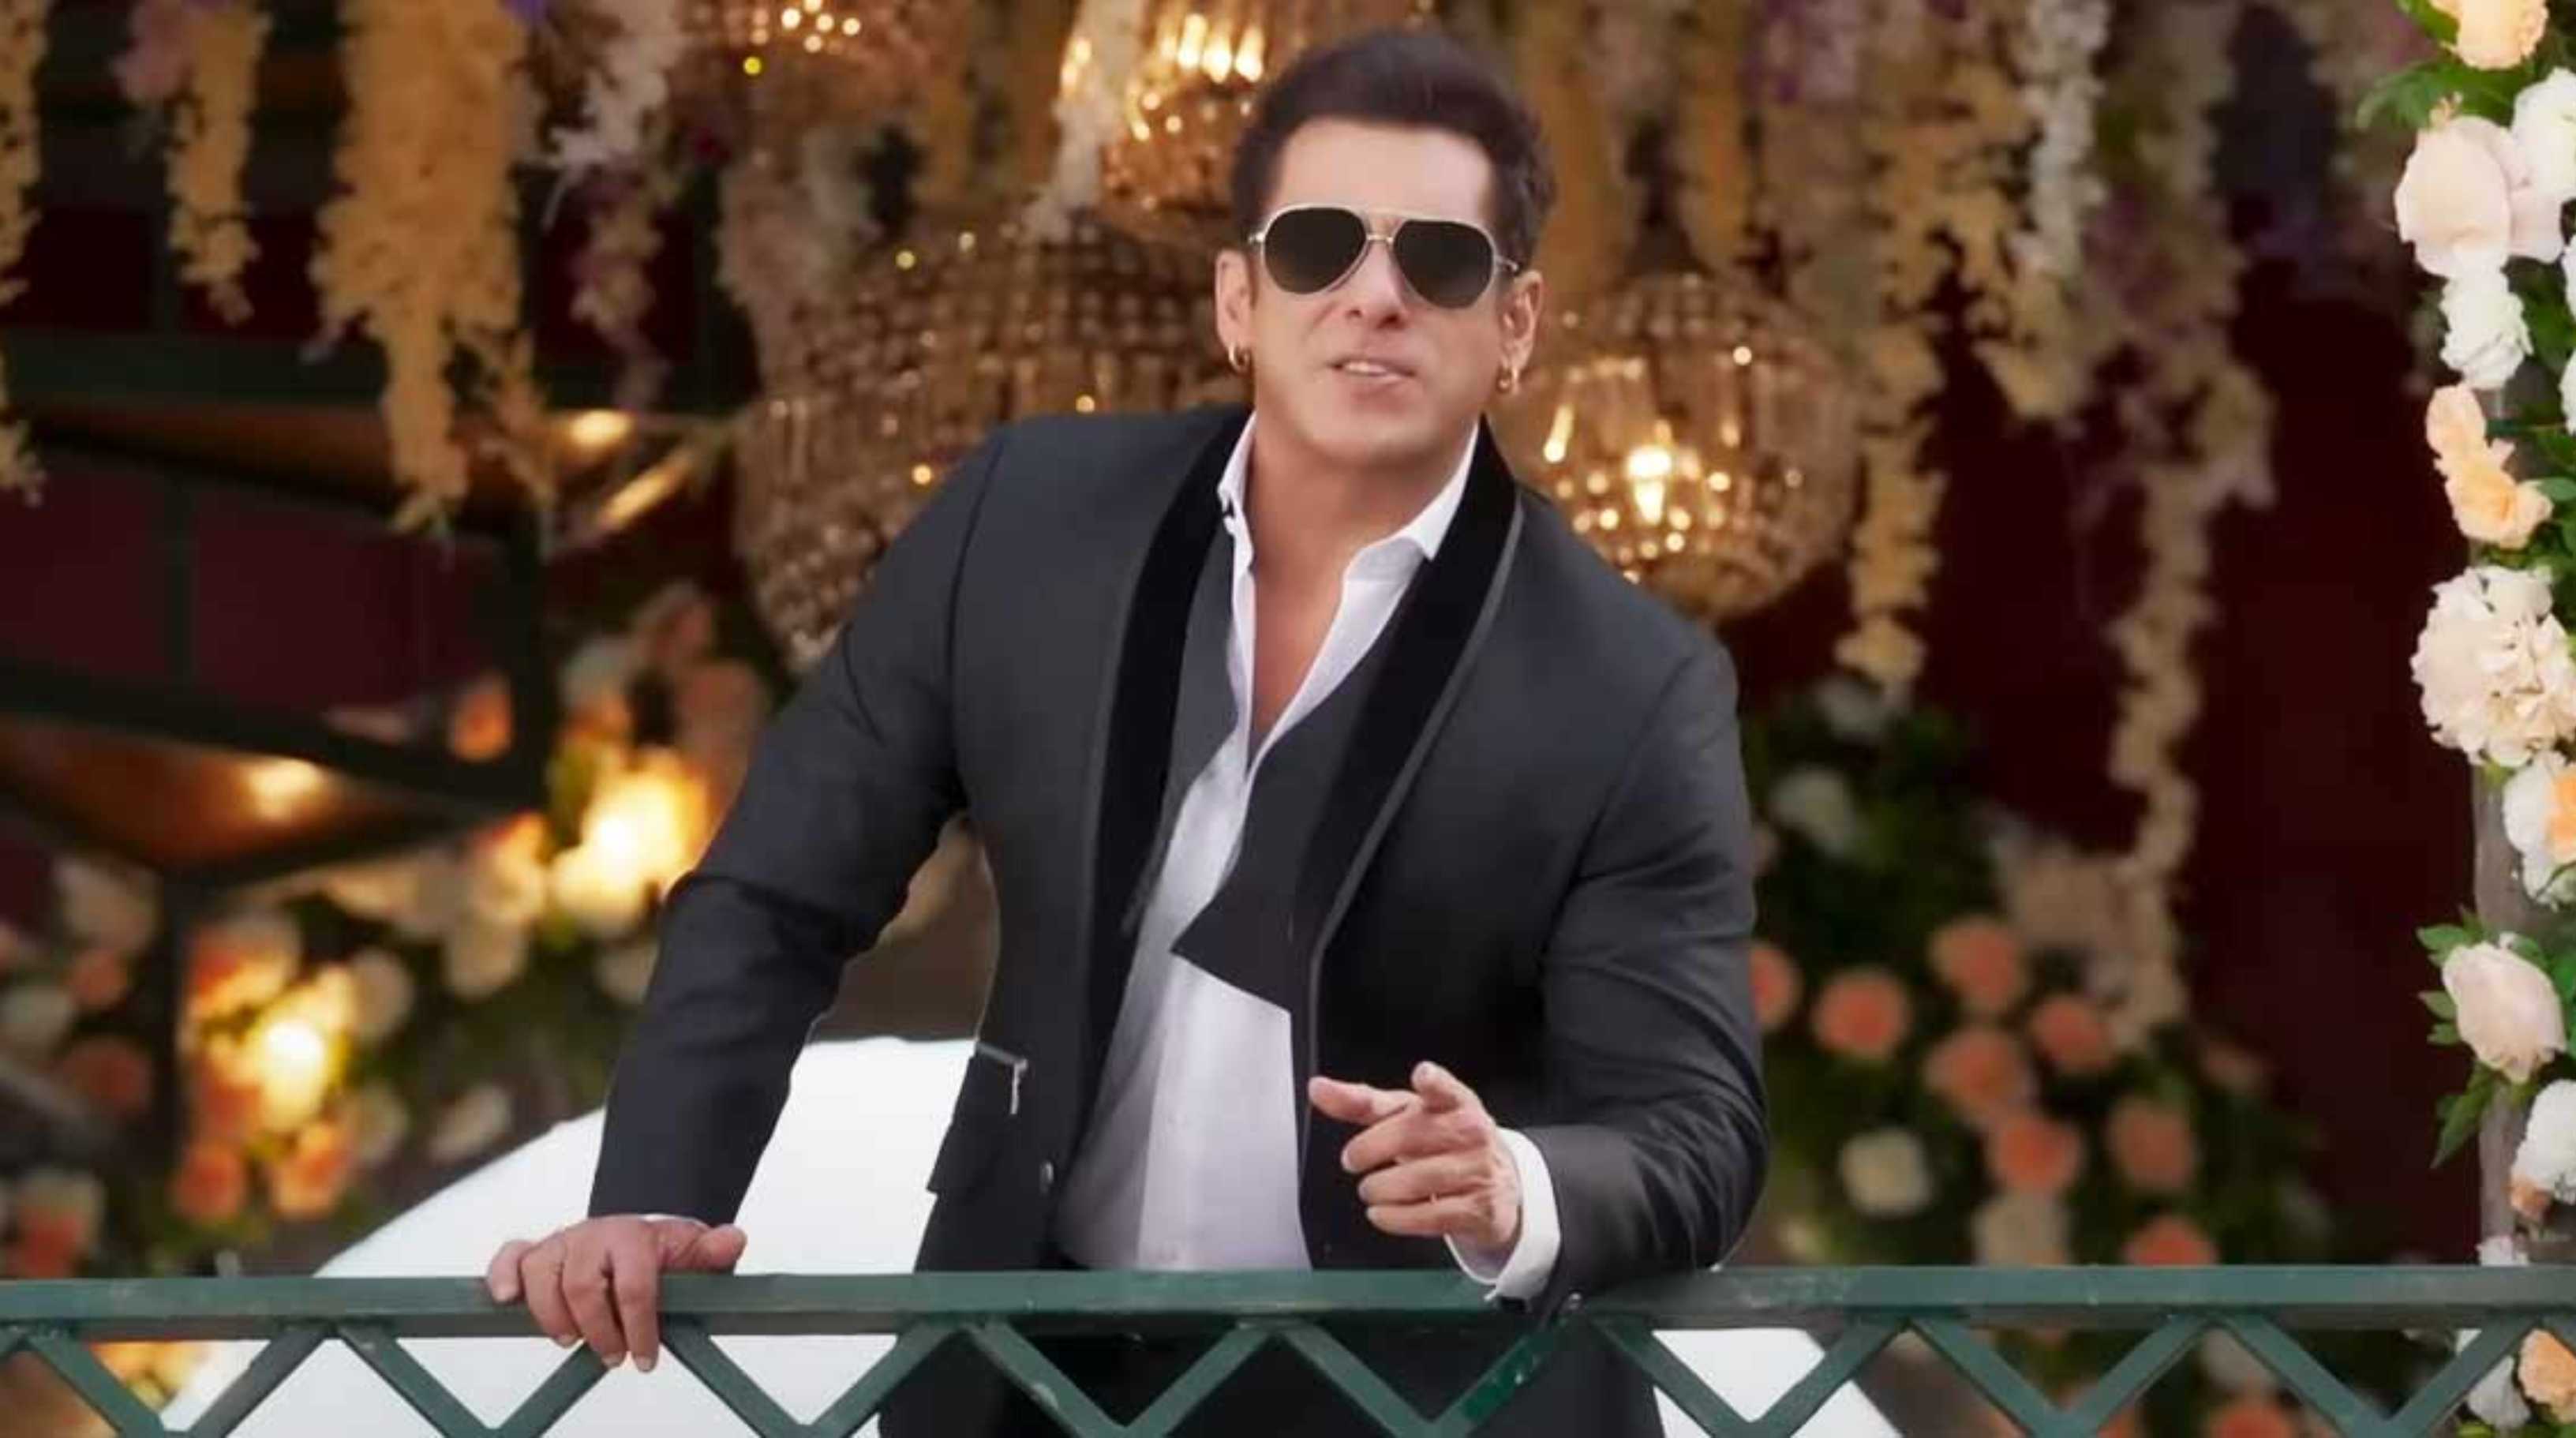 Kisi Ka Bhai Kisi Ki Jaan Box Office Day 6: Salman Khan starrer sees a further drop in collections, might spell bad news for the family entertainer